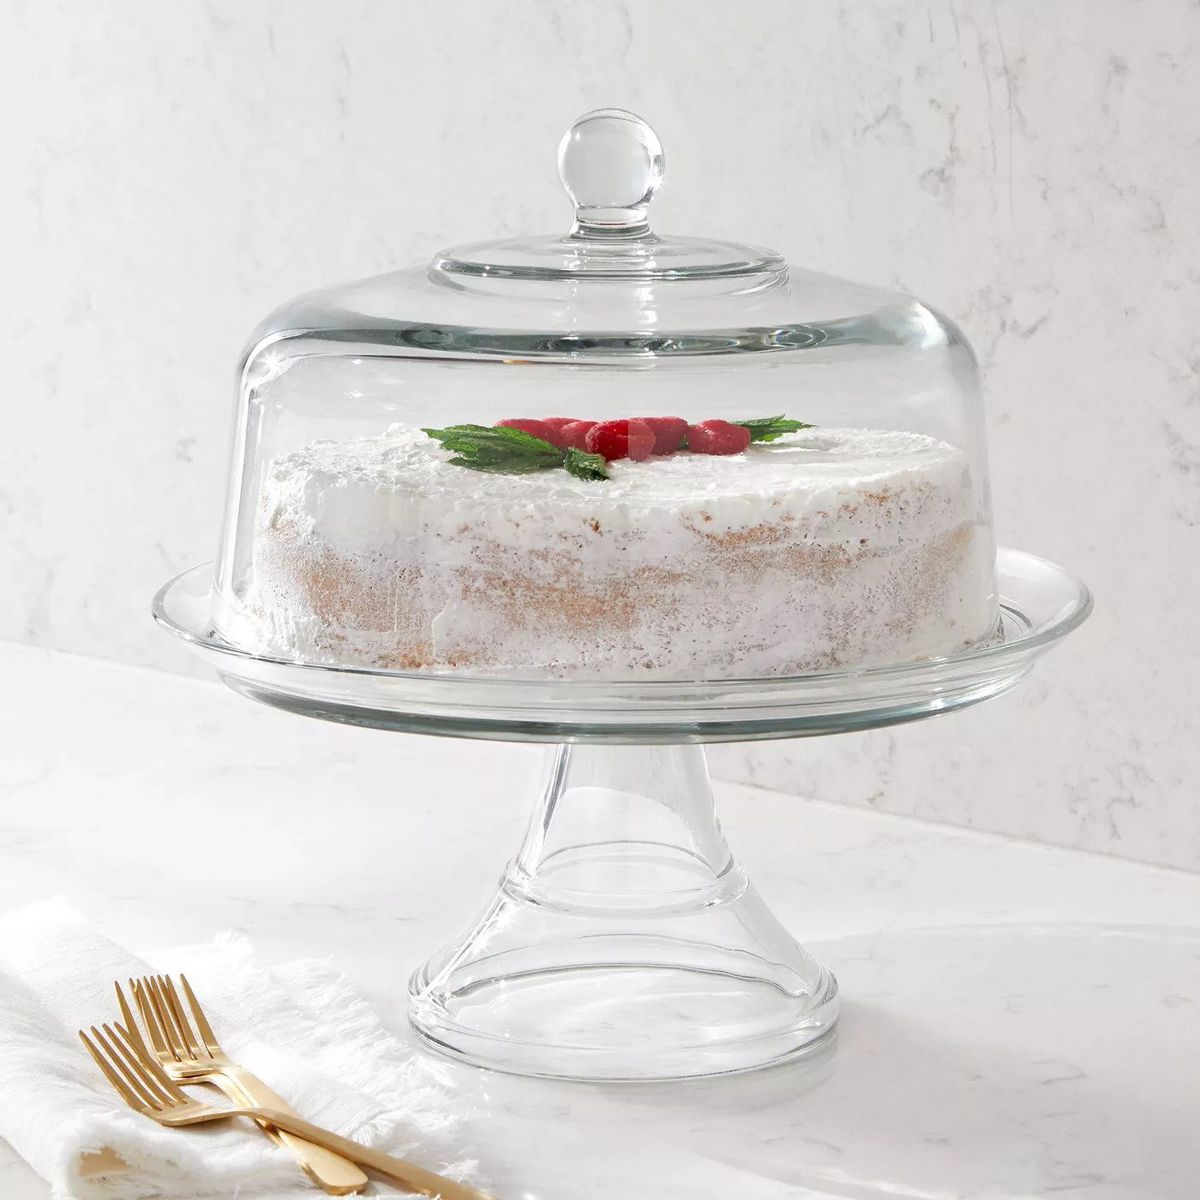 A glass cake stand with dome